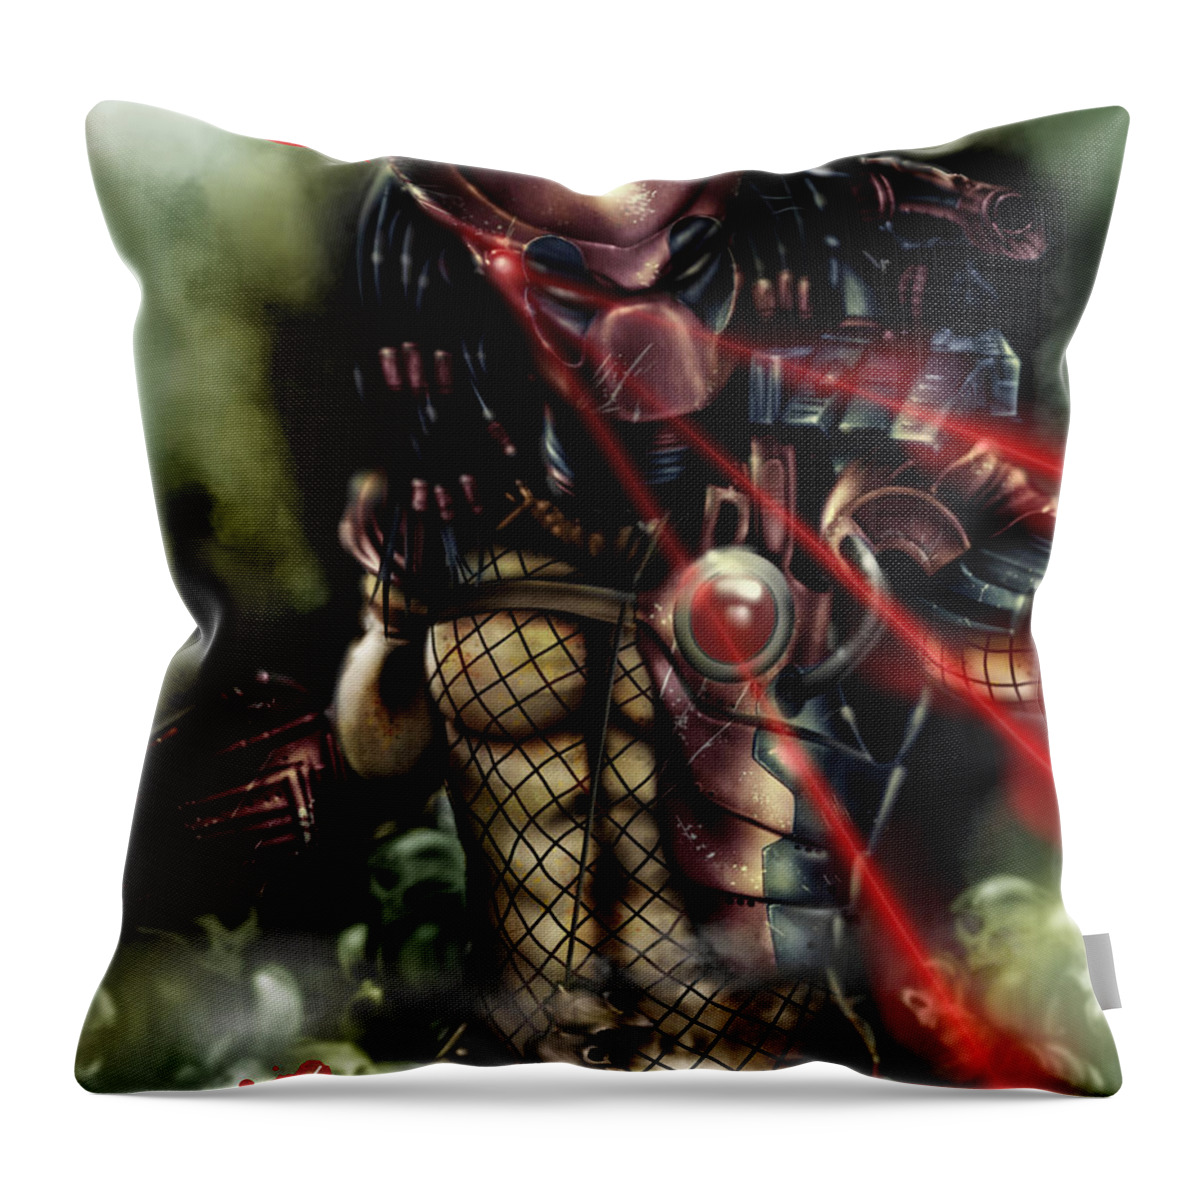 Xmen Throw Pillow featuring the painting Predapool by Pete Tapang